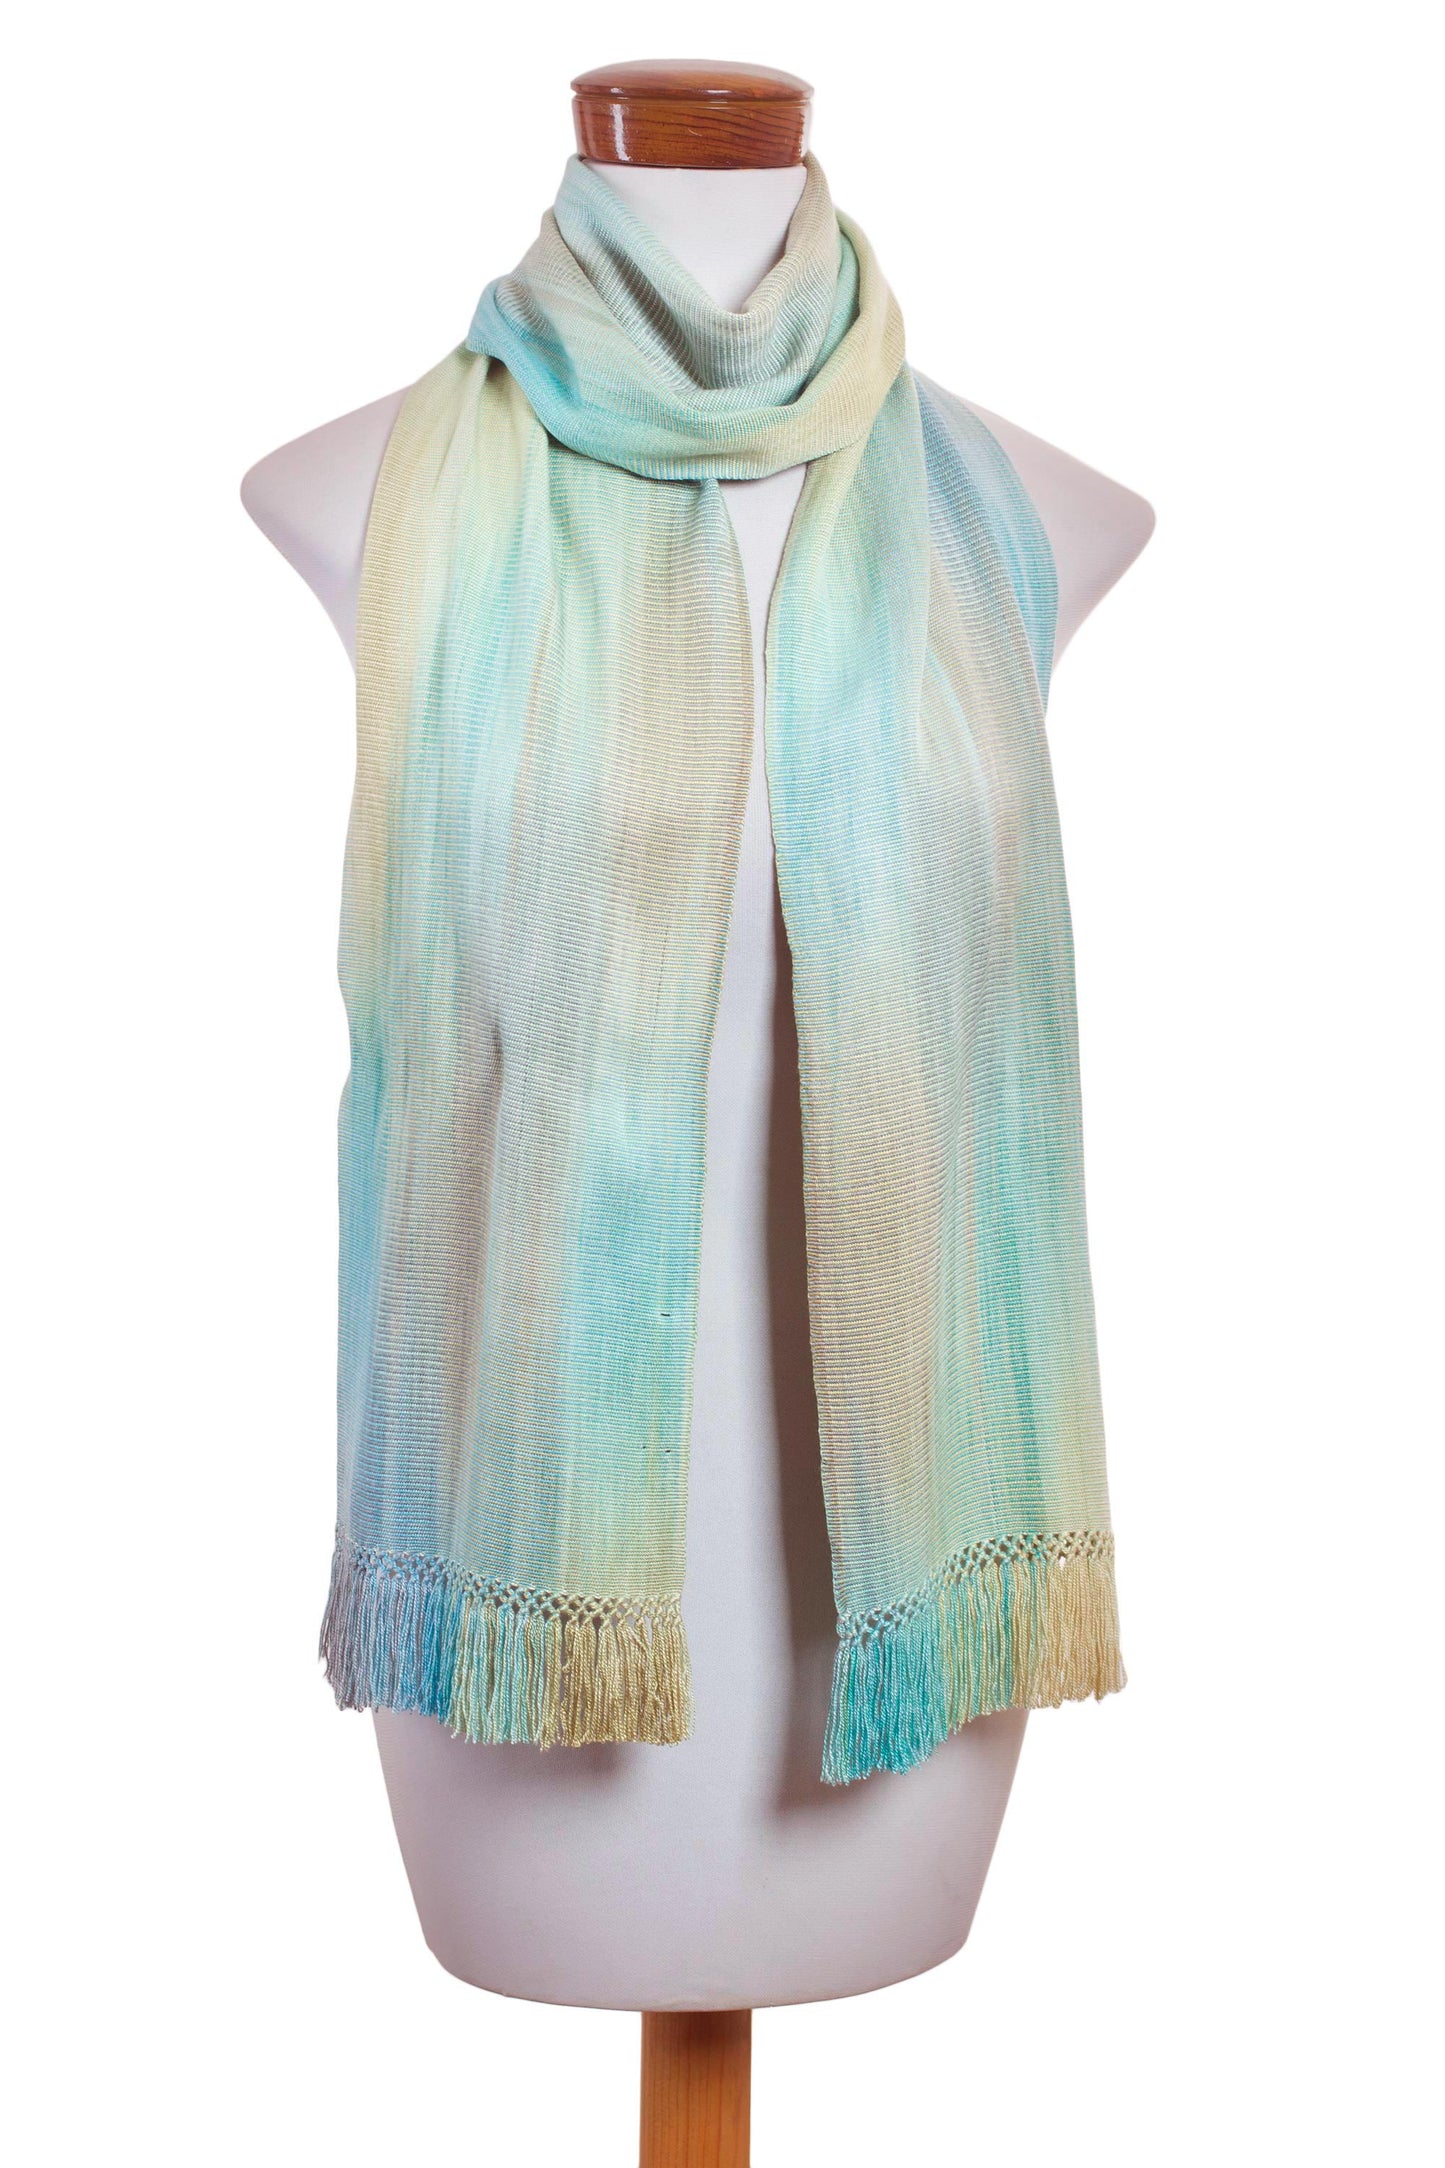 Iridescent Mint Pastel Hand Woven Pastel Blue Green Rayon Chenille Scarf